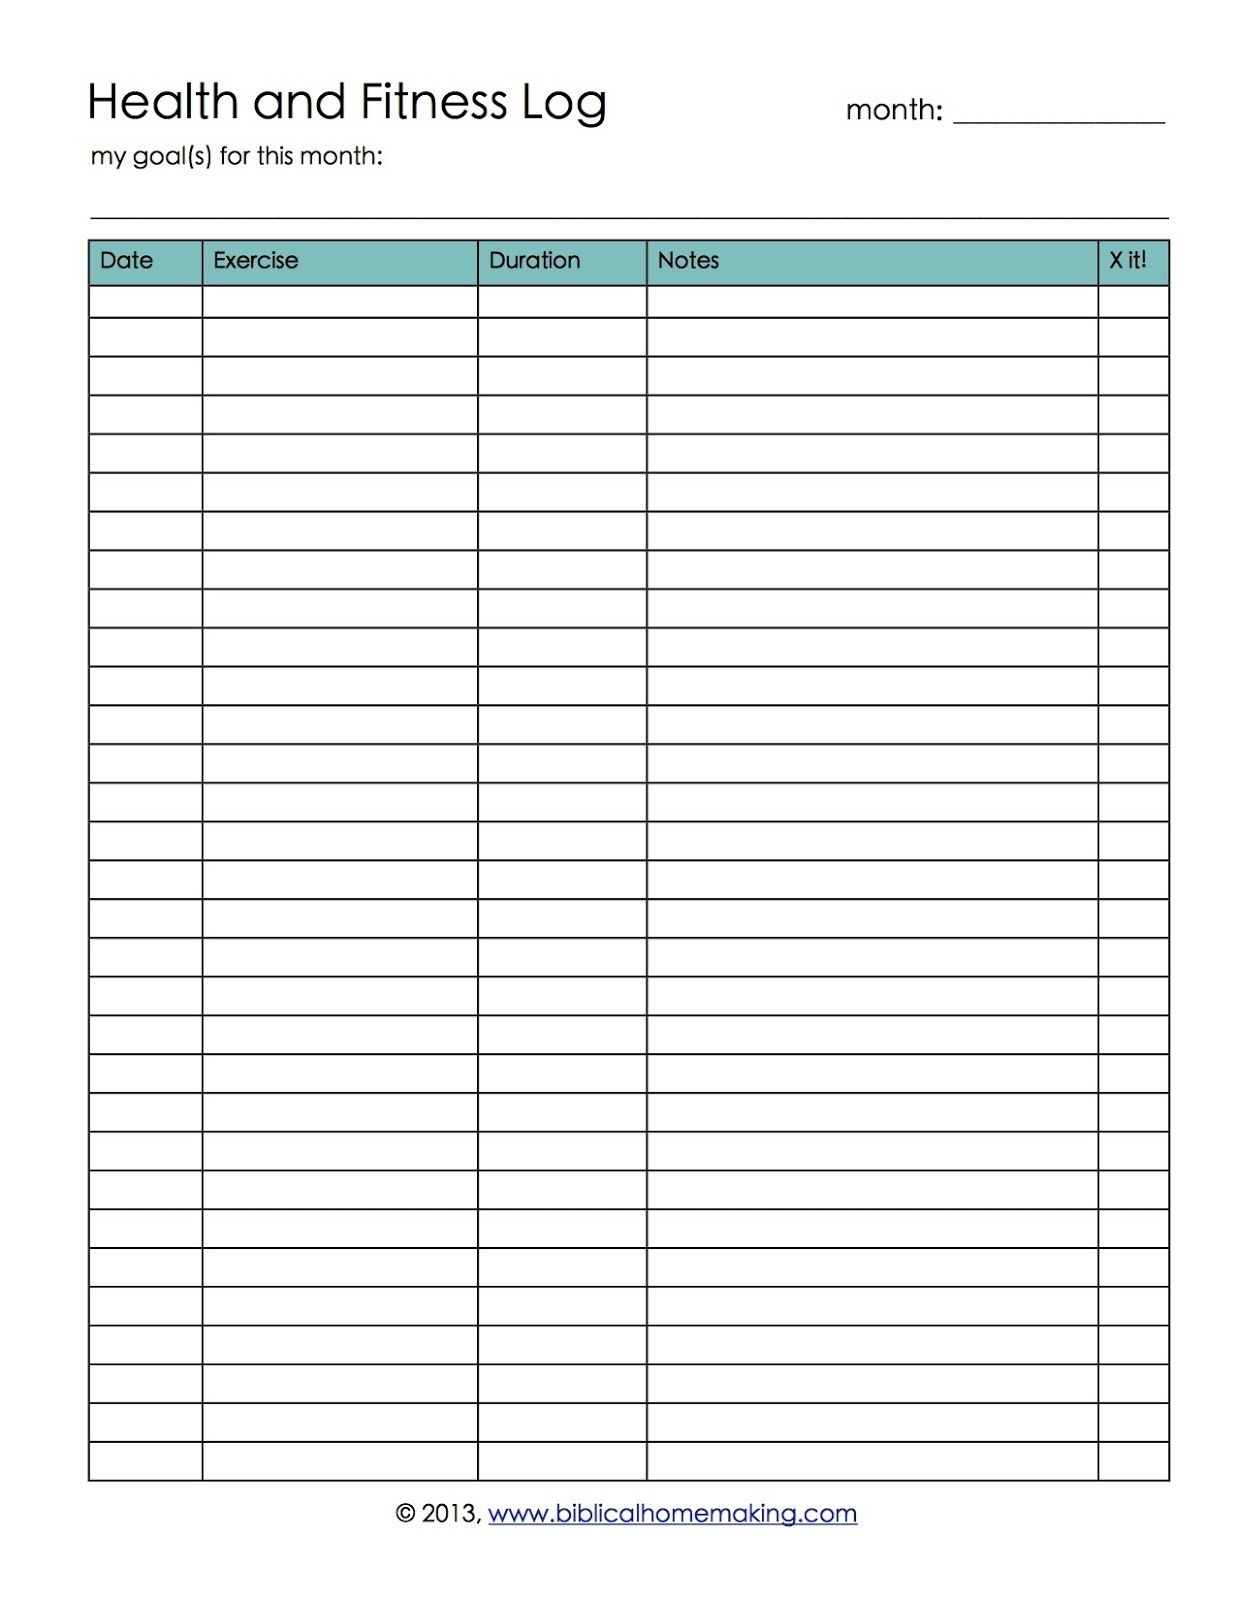 Workout Log Sheet | Health And Fitness Log Printable With Monthly Sign Up Sheets Printable